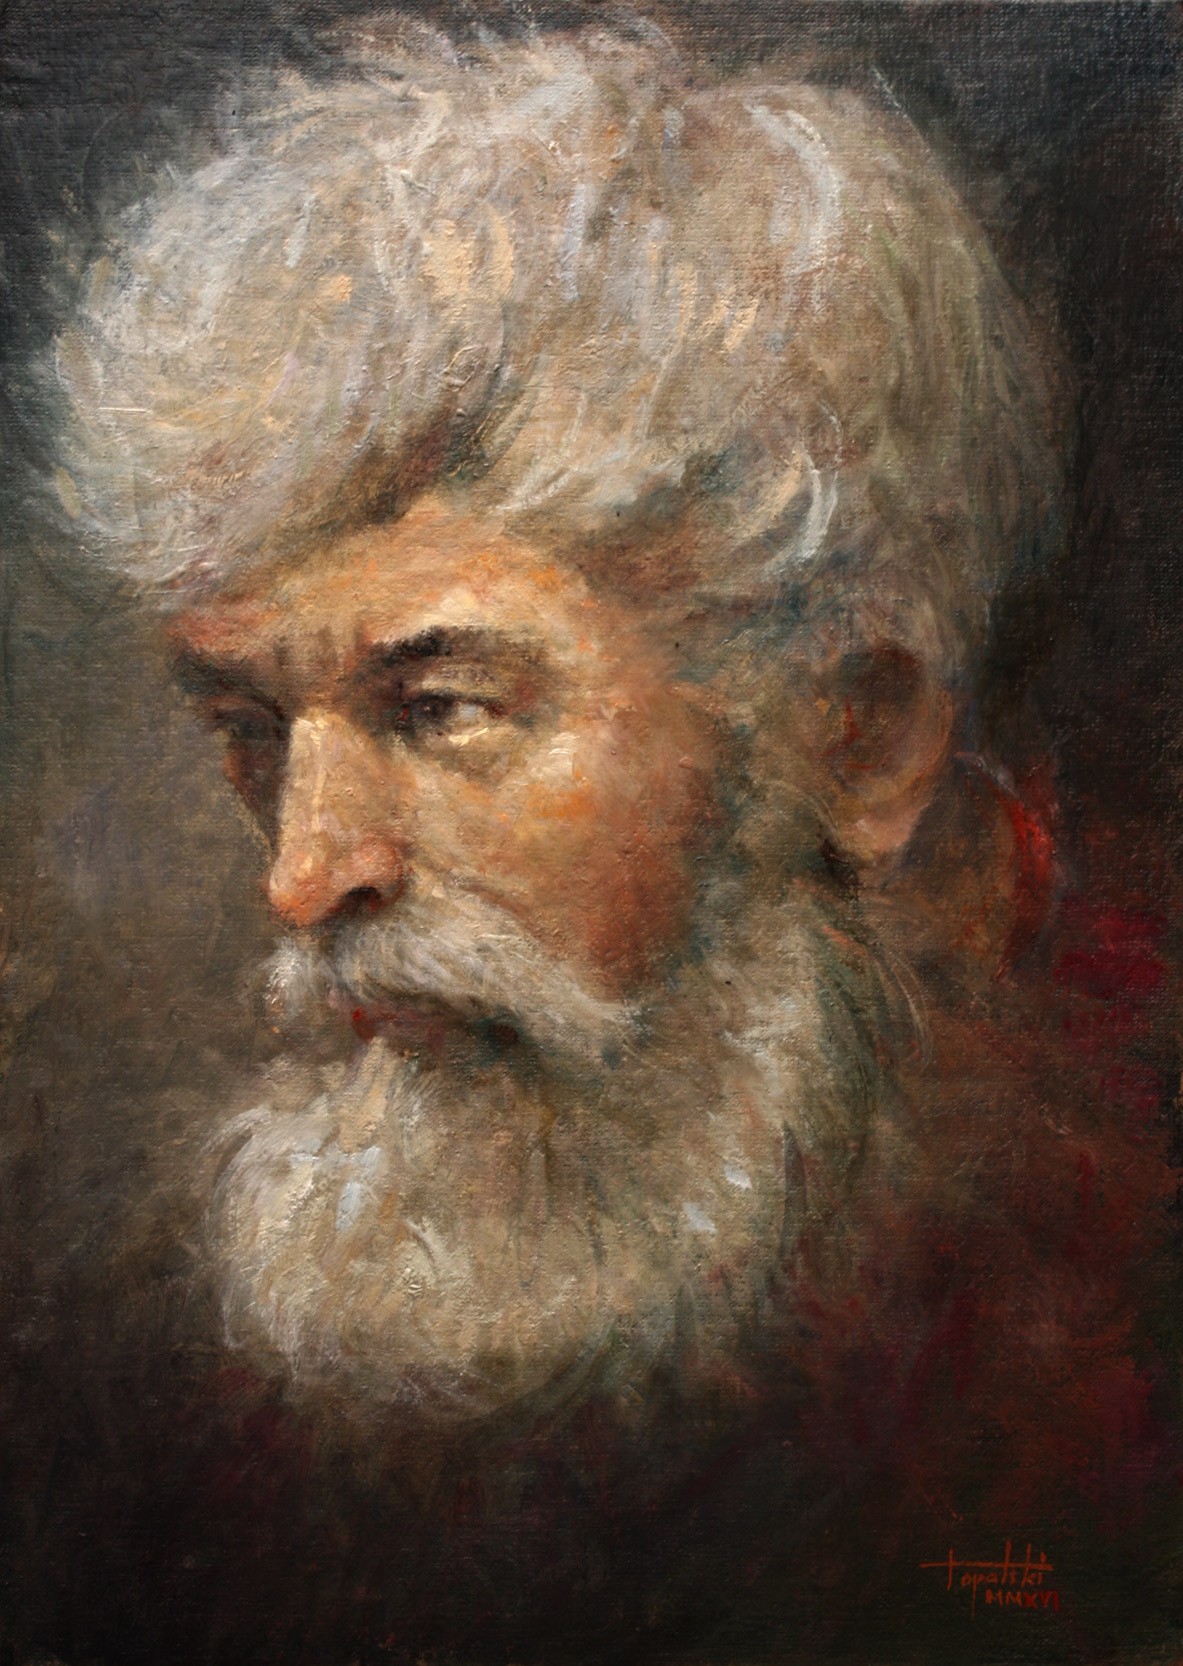 Portrait of an Old Man – Oil Painting | Fine Arts Gallery - Original ...